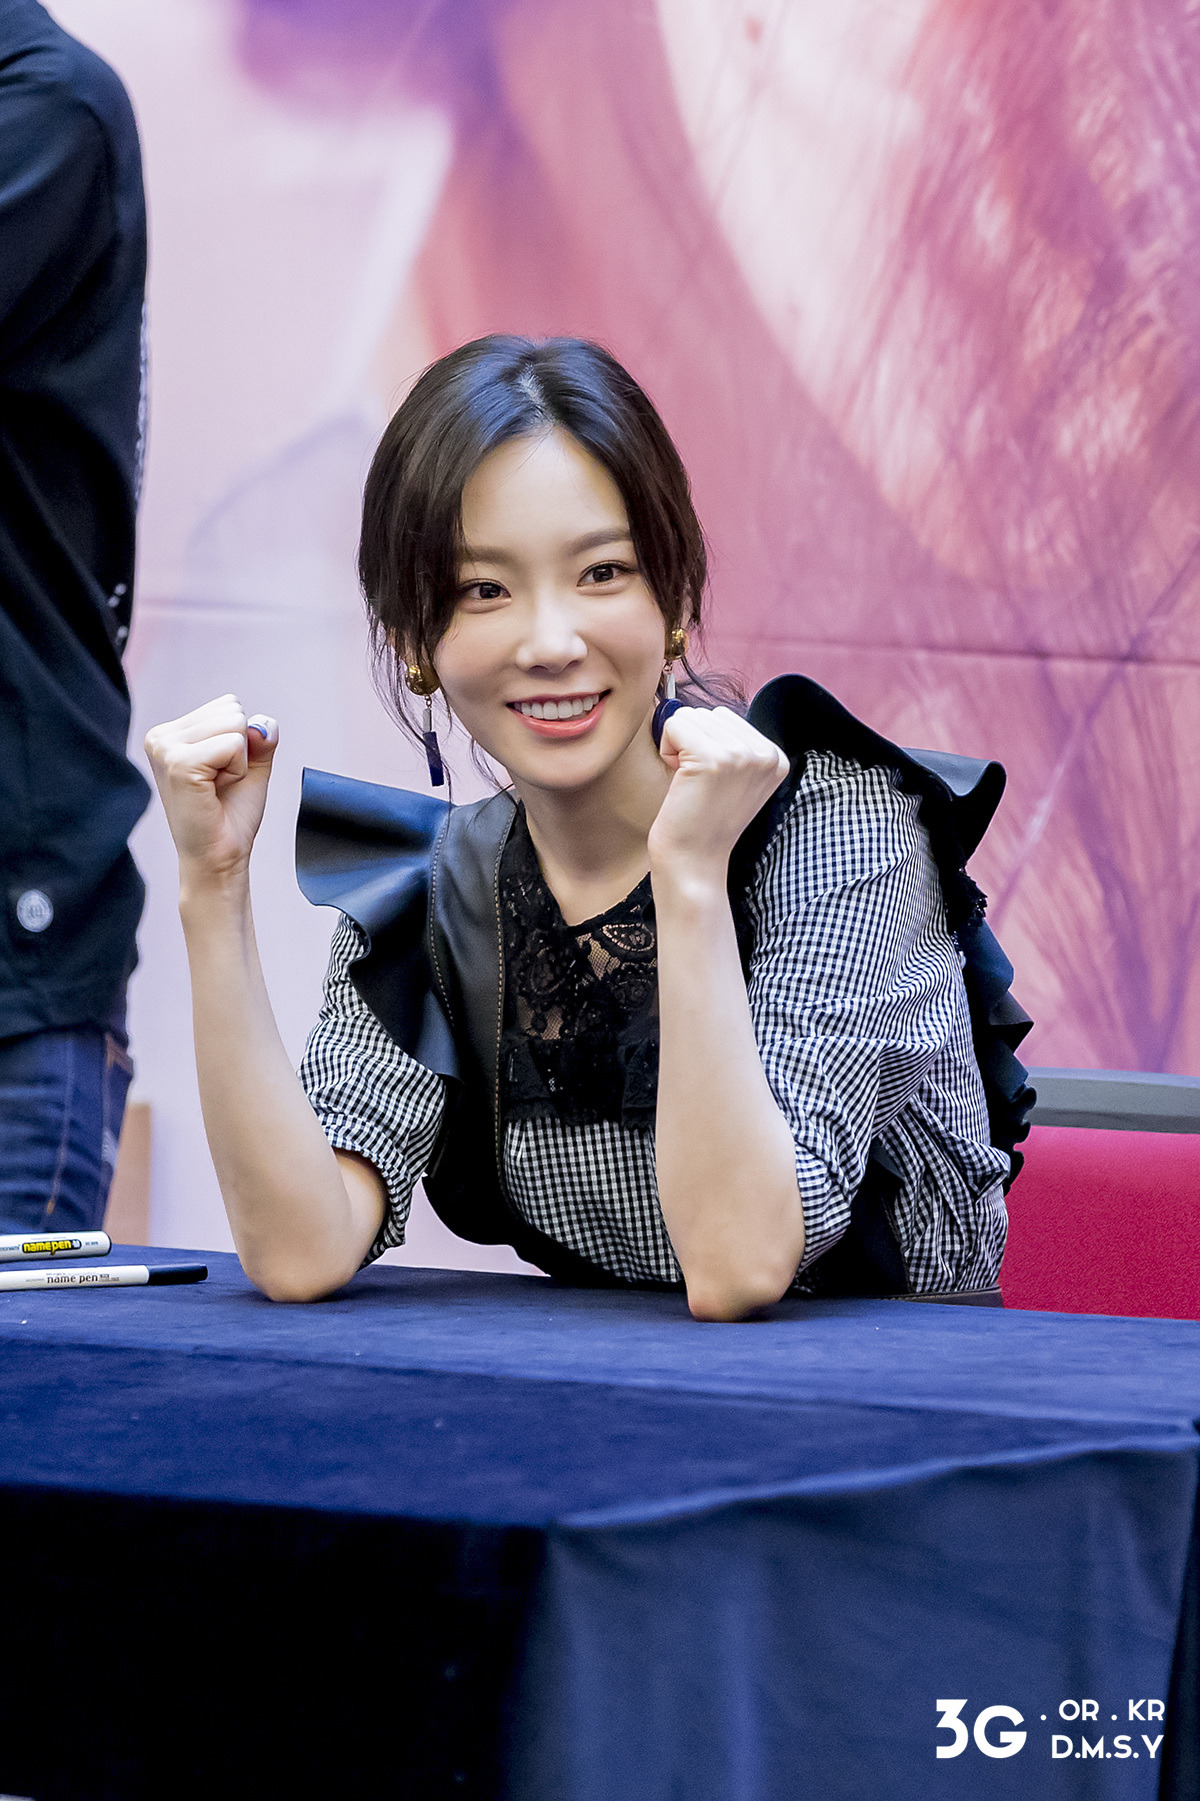 [PIC][16-04-2017]TaeYeon tham dự buổi Fansign cho “MY VOICE DELUXE EDITION” tại AK PLAZA vào chiều nay  - Page 5 2762853D58FDD8D10EE15D